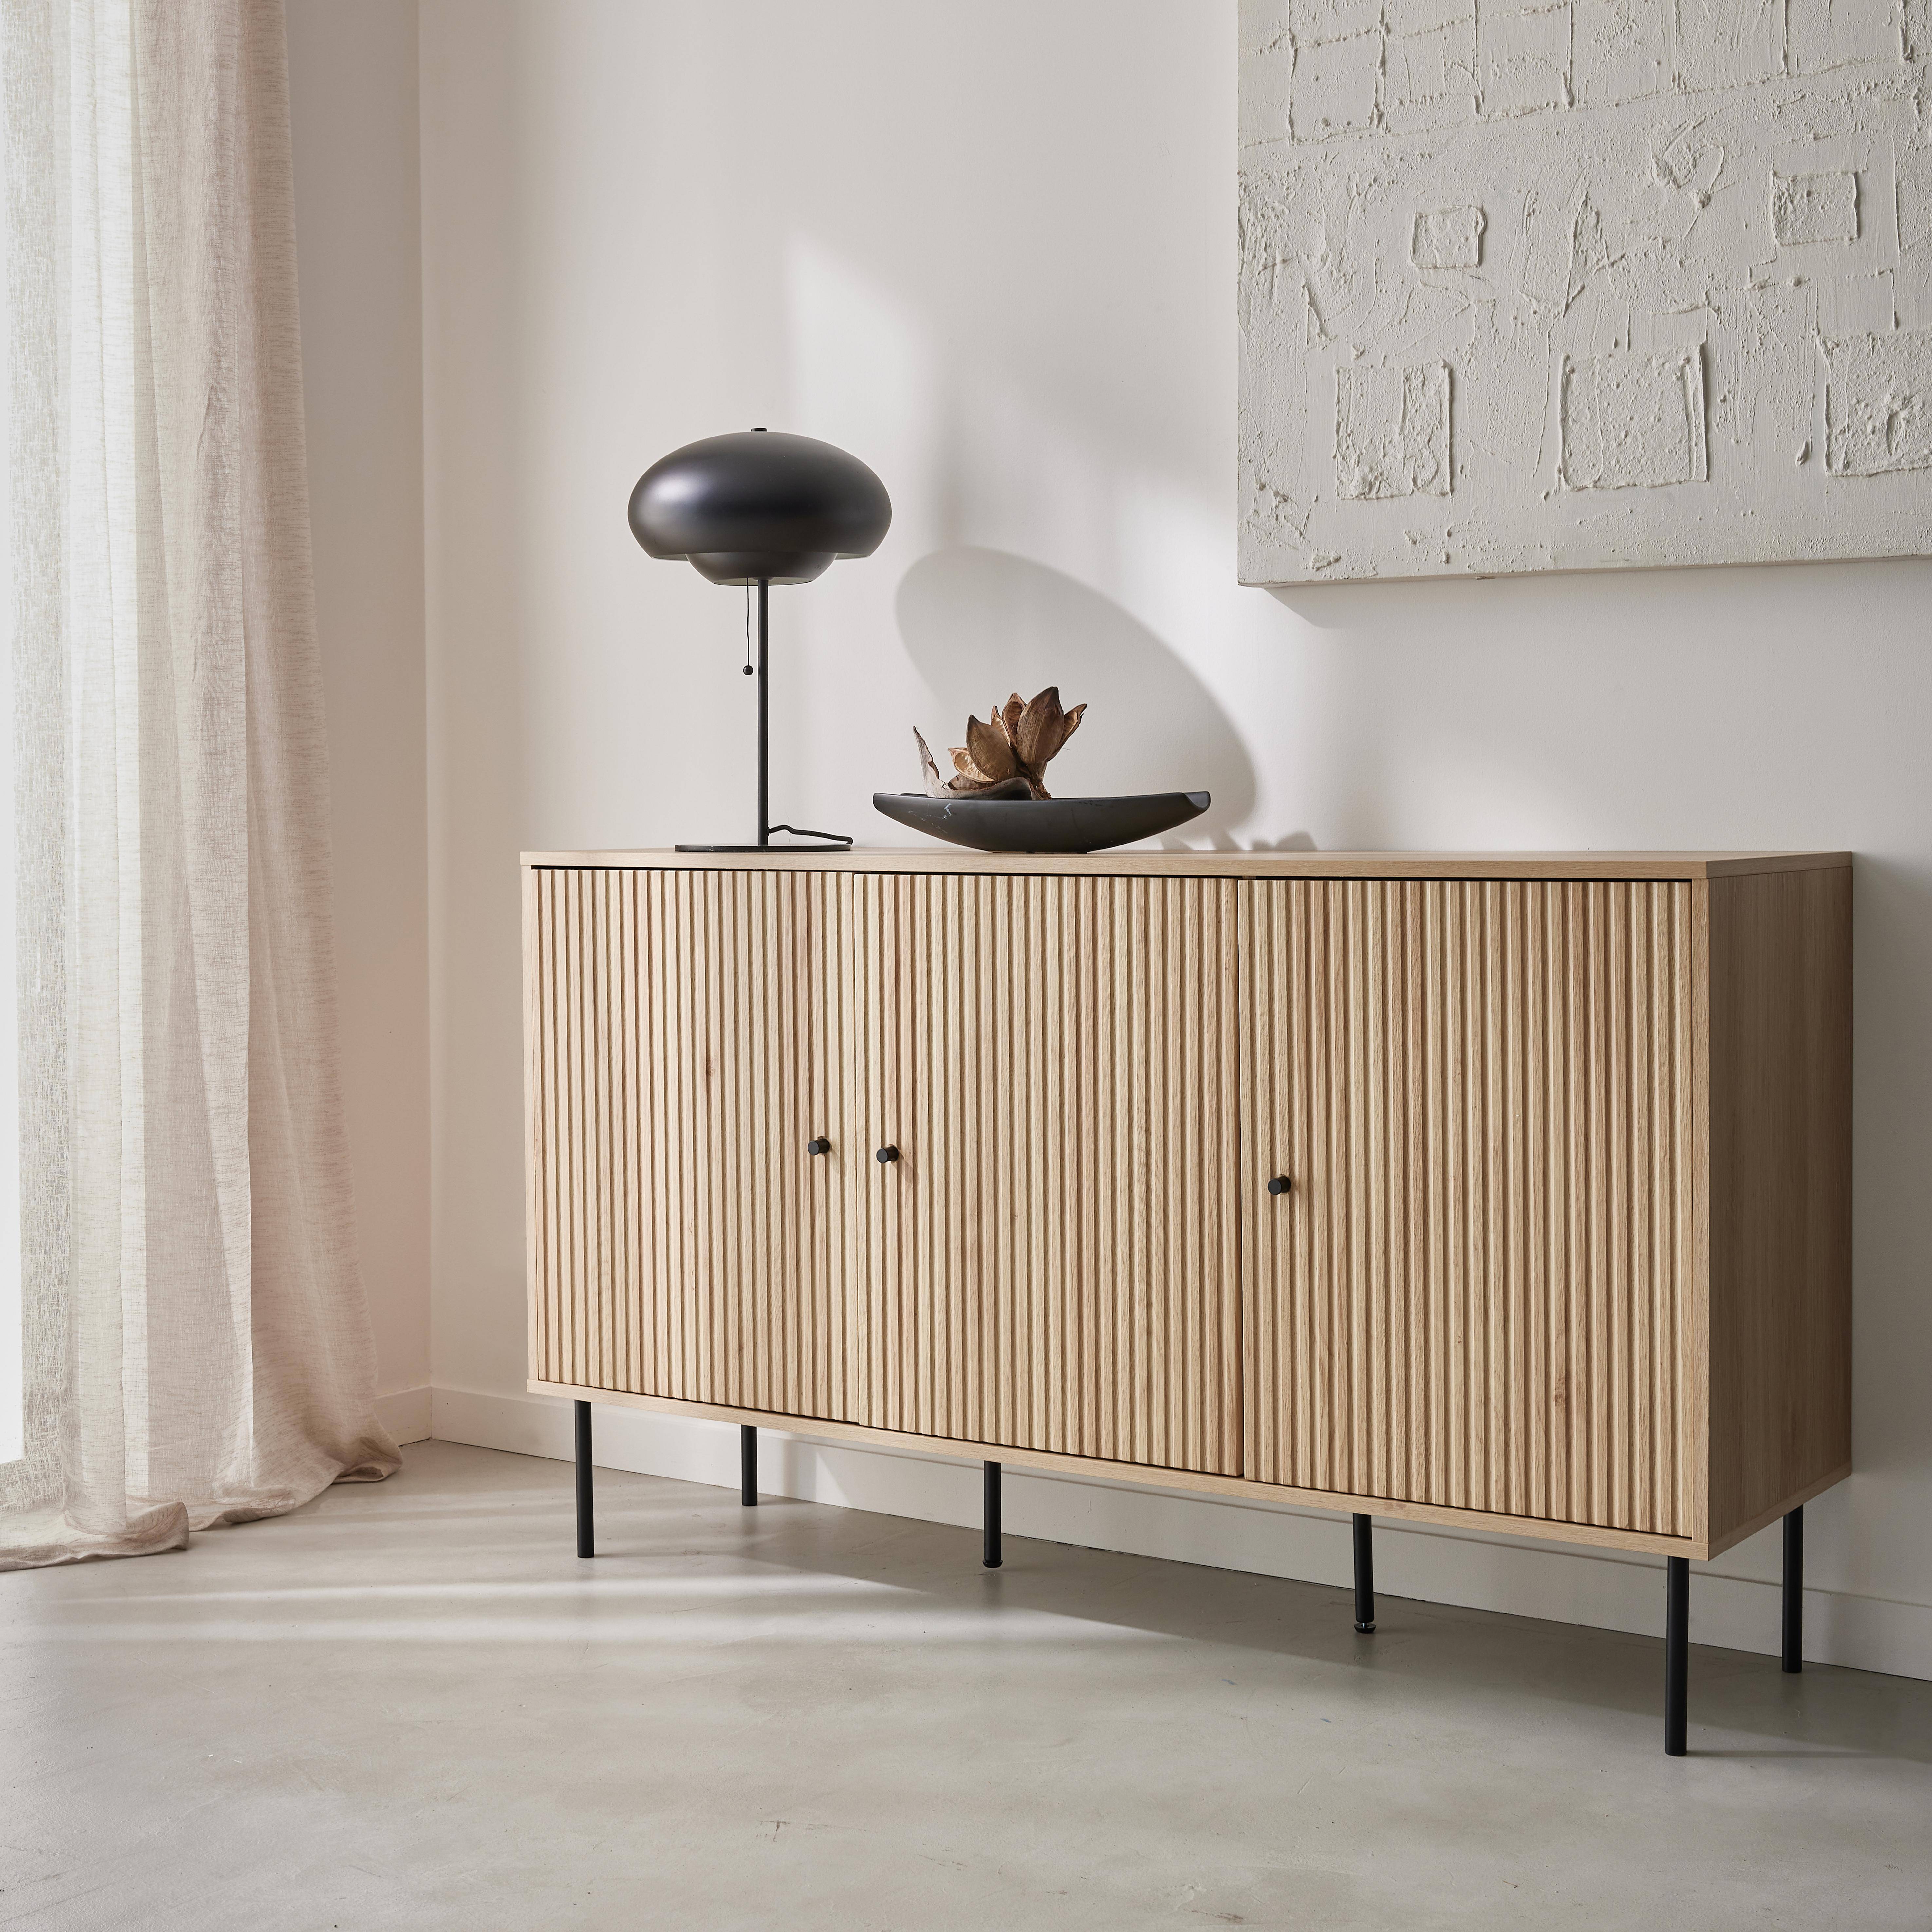 Storage sideboard in grooved wood decor with black metal handles and legs 140 cm Photo1